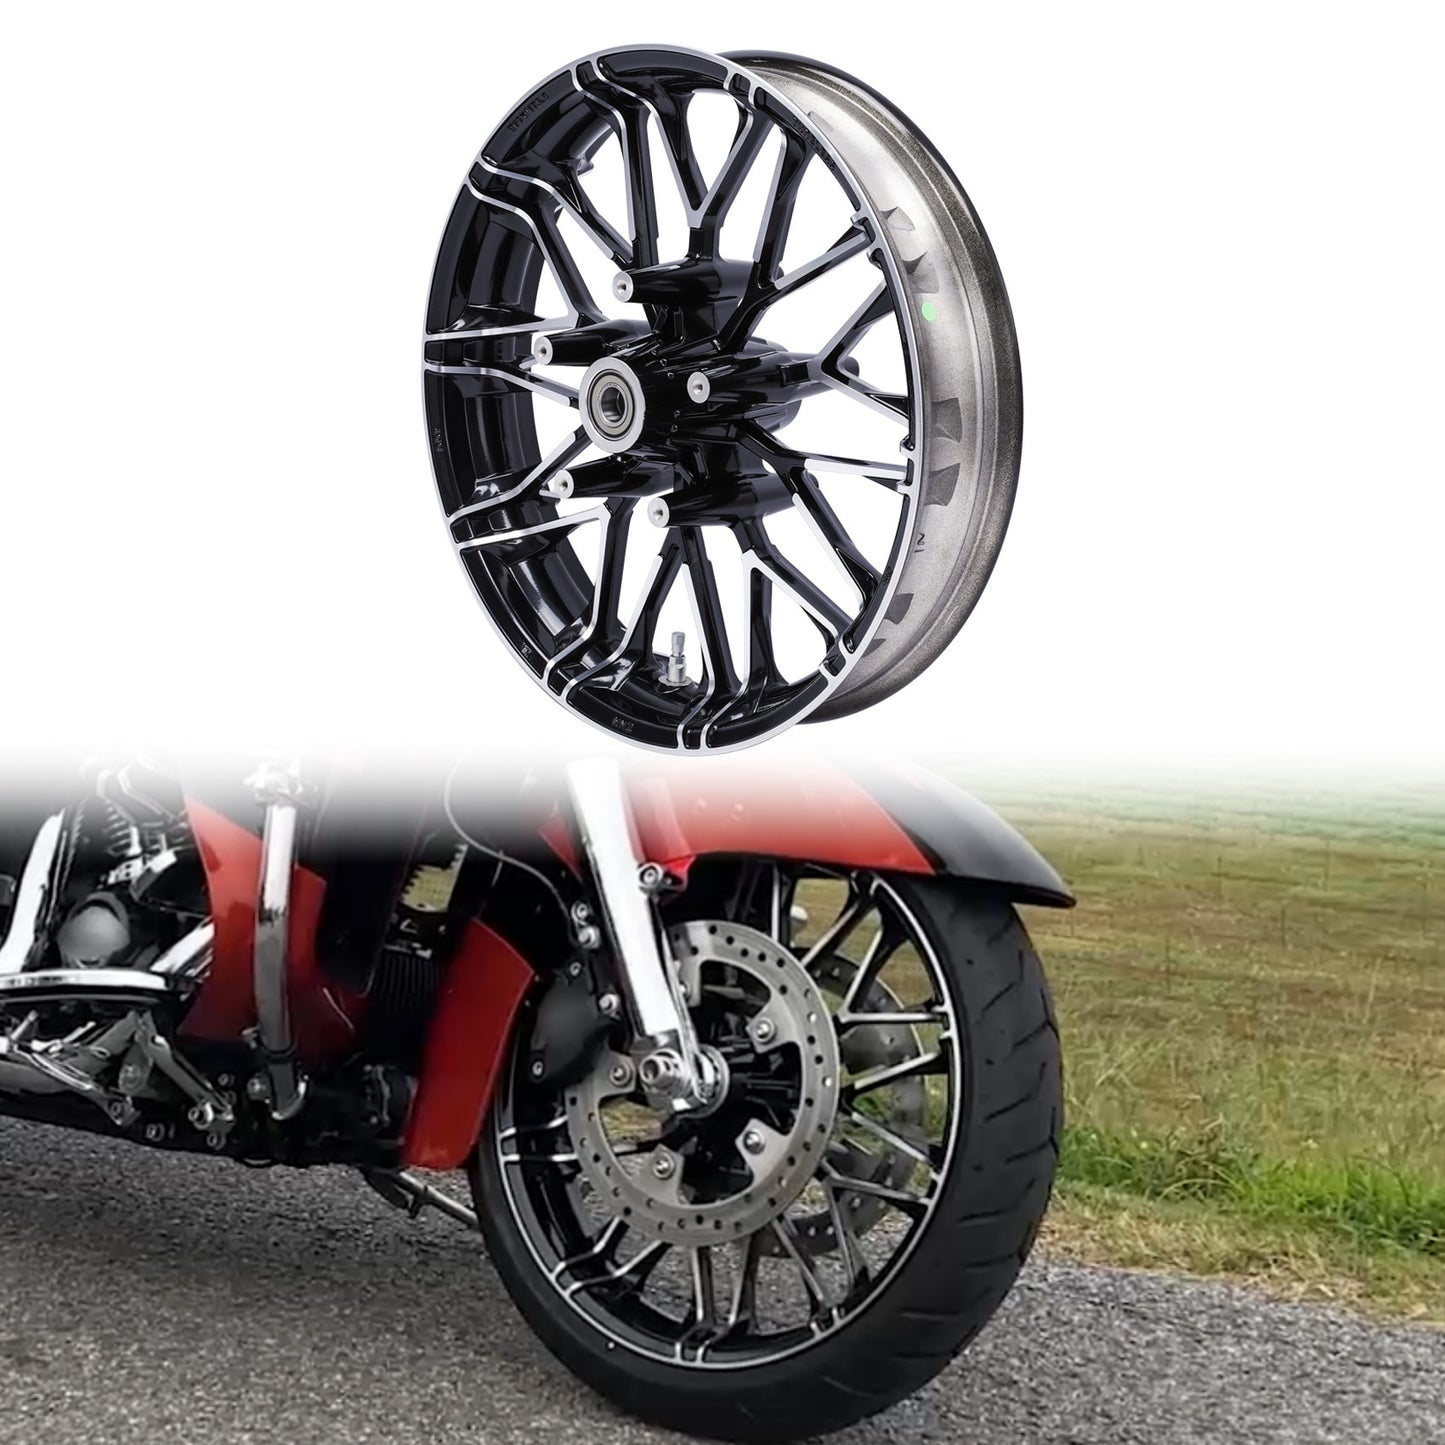 Voodoo Cycle House Custom 19" X 3.5" Front Wheel For Harley-Davidson Touring Models Road Street Glide 2008-UP